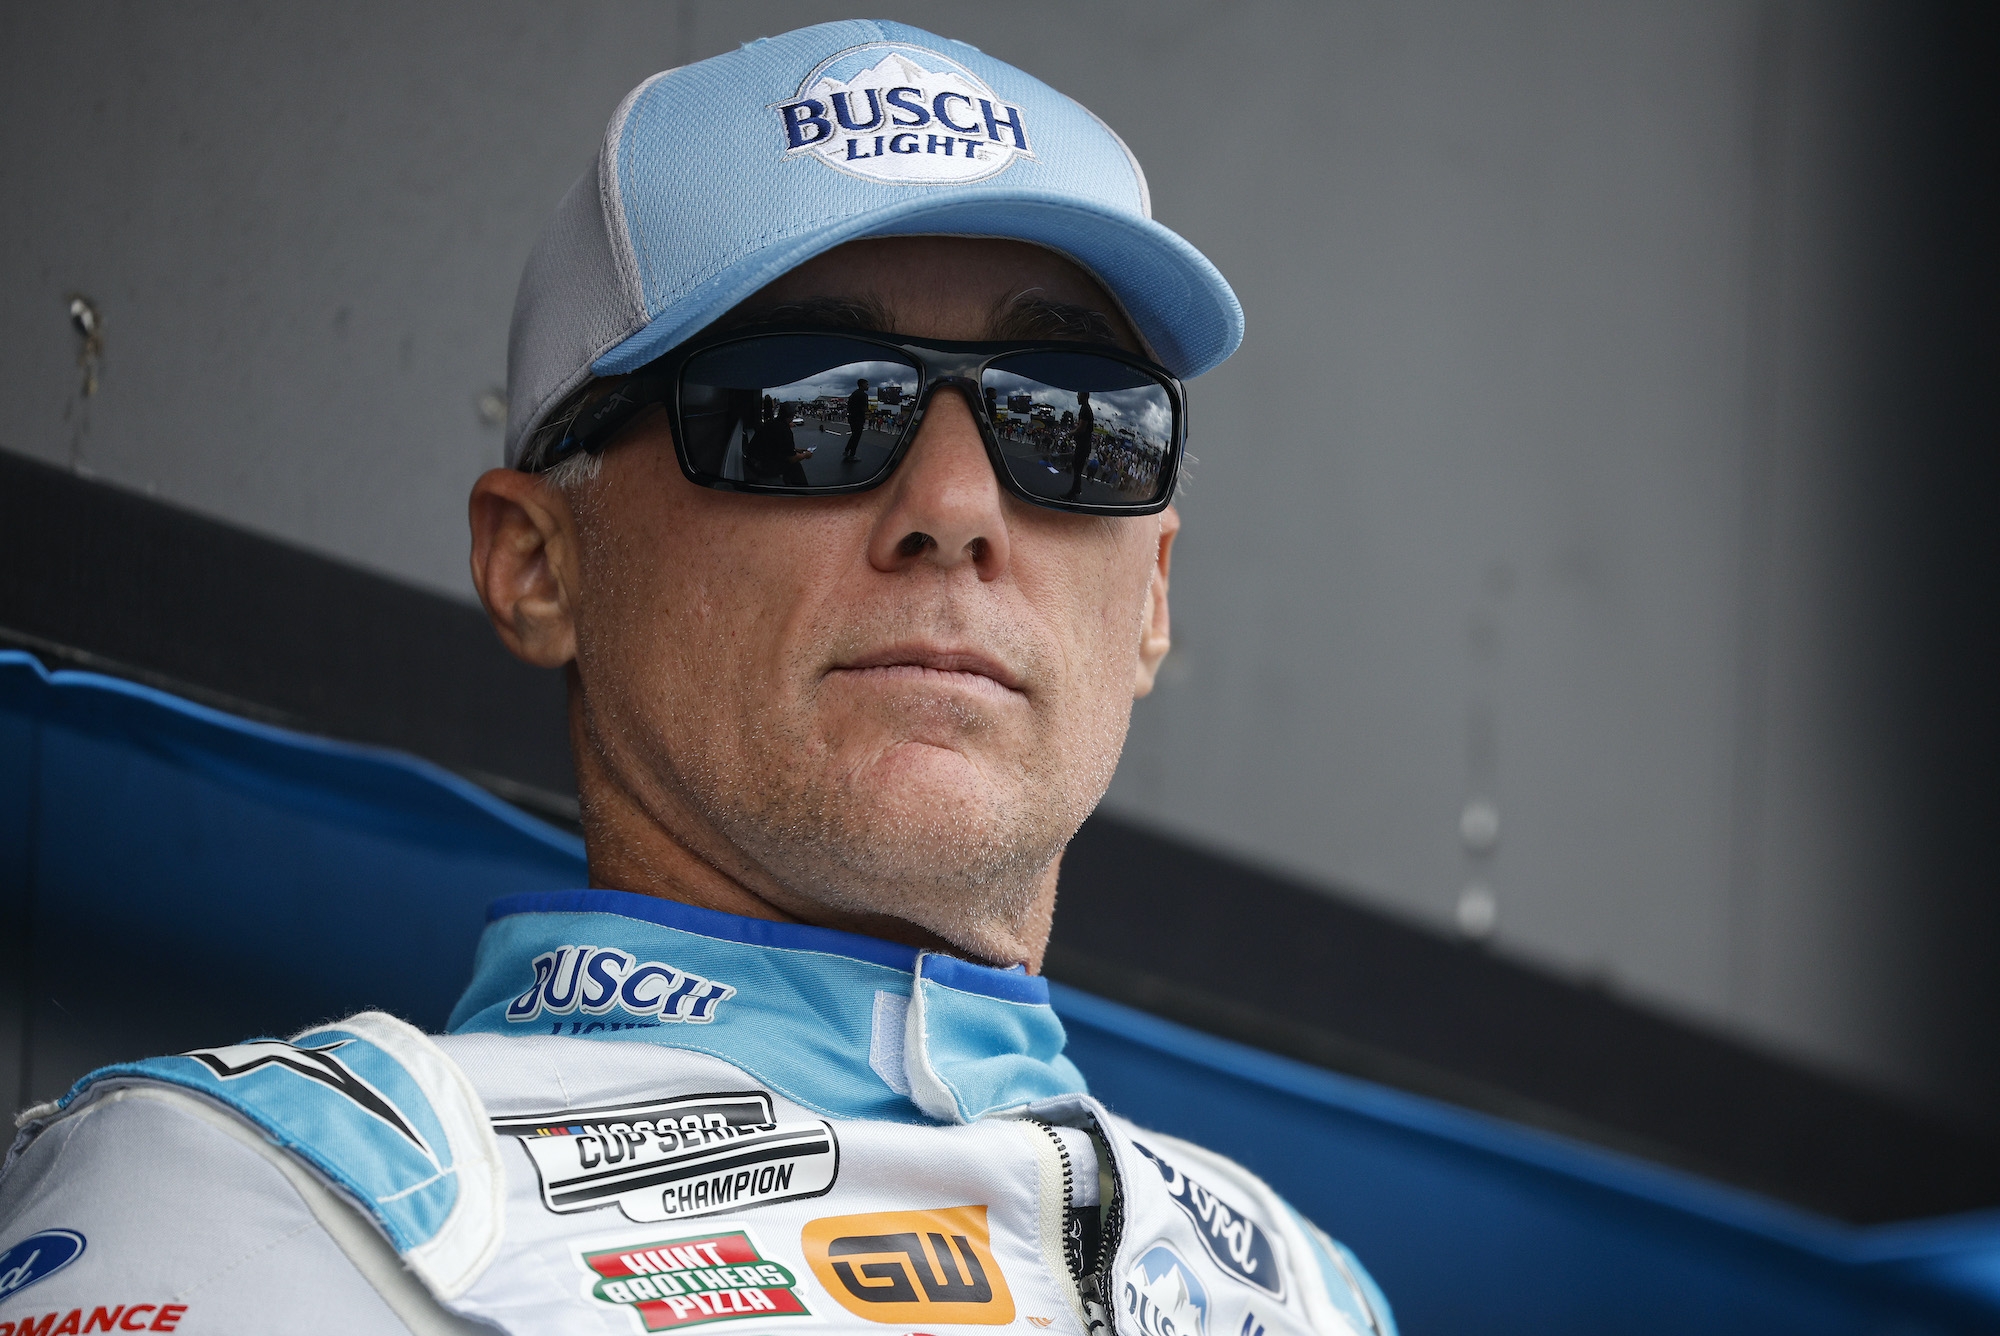 Kevin Harvick and Other Drivers Push Back With NASCAR and Sanctioning Body Scraps ‘Science Experiment’ at Martinsville, According to Report